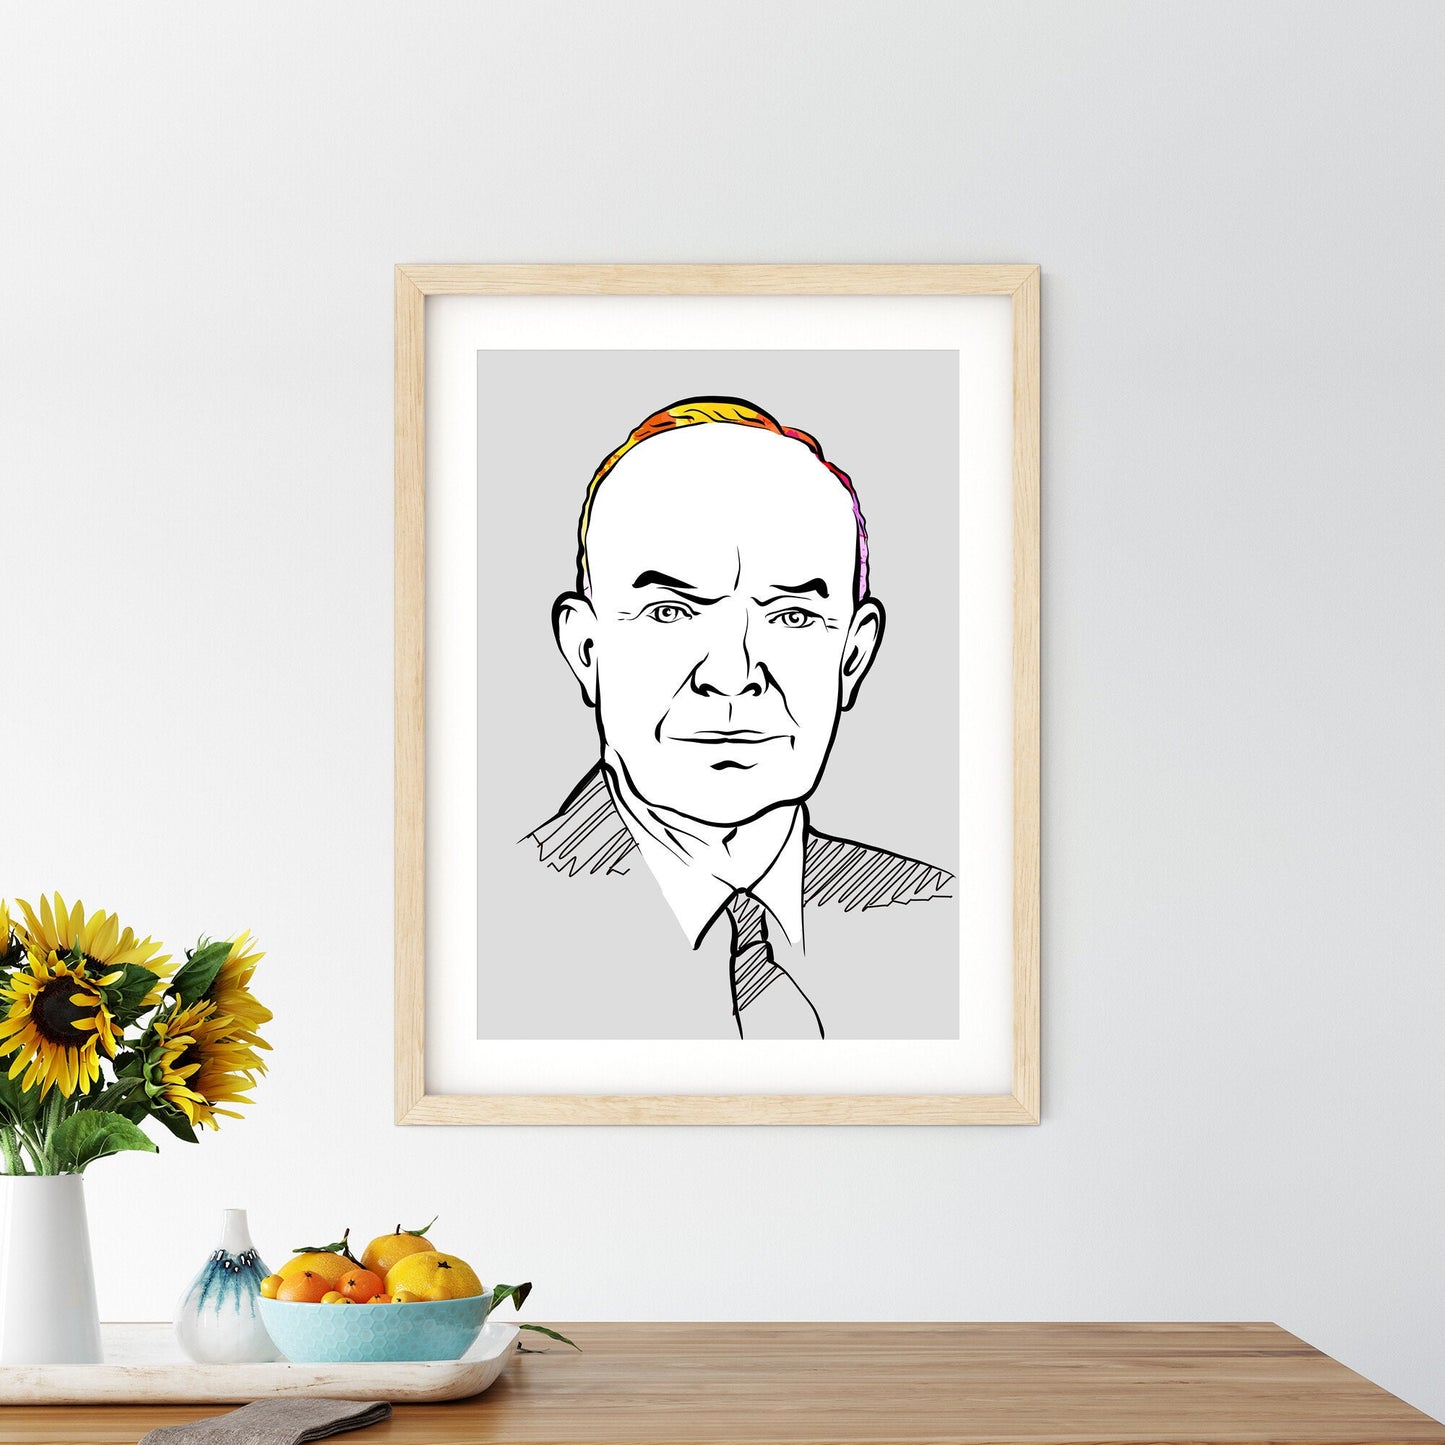 Dwight D. Eisenhower Portrait Poster With Colorful Hair. Perfect print for patriots.